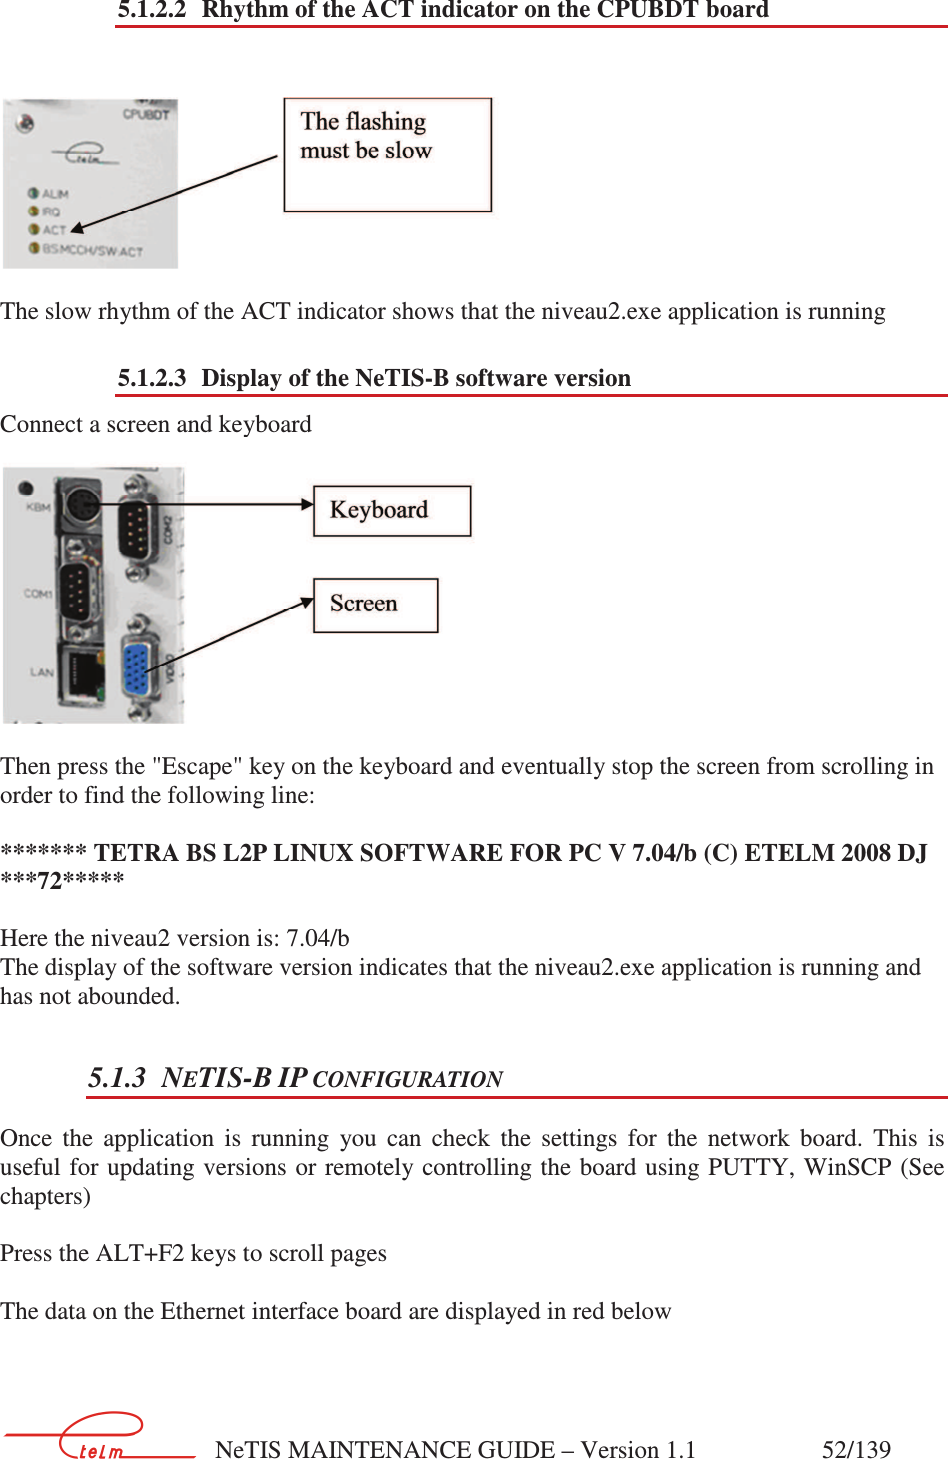        NeTIS MAINTENANCE GUIDE – Version 1.1                    52/139   5.1.2.2 Rhythm of the ACT indicator on the CPUBDT board       The slow rhythm of the ACT indicator shows that the niveau2.exe application is running 5.1.2.3 Display of the NeTIS-B software version Connect a screen and keyboard   Then press the &quot;Escape&quot; key on the keyboard and eventually stop the screen from scrolling in order to find the following line:   ******* TETRA BS L2P LINUX SOFTWARE FOR PC V 7.04/b (C) ETELM 2008 DJ ***72*****  Here the niveau2 version is: 7.04/b The display of the software version indicates that the niveau2.exe application is running and has not abounded. 5.1.3 NETIS-B IP CONFIGURATION Once  the  application  is  running  you  can  check  the  settings  for  the  network  board.  This  is useful for updating versions or remotely controlling the  board  using PUTTY, WinSCP  (See chapters)  Press the ALT+F2 keys to scroll pages  The data on the Ethernet interface board are displayed in red below  